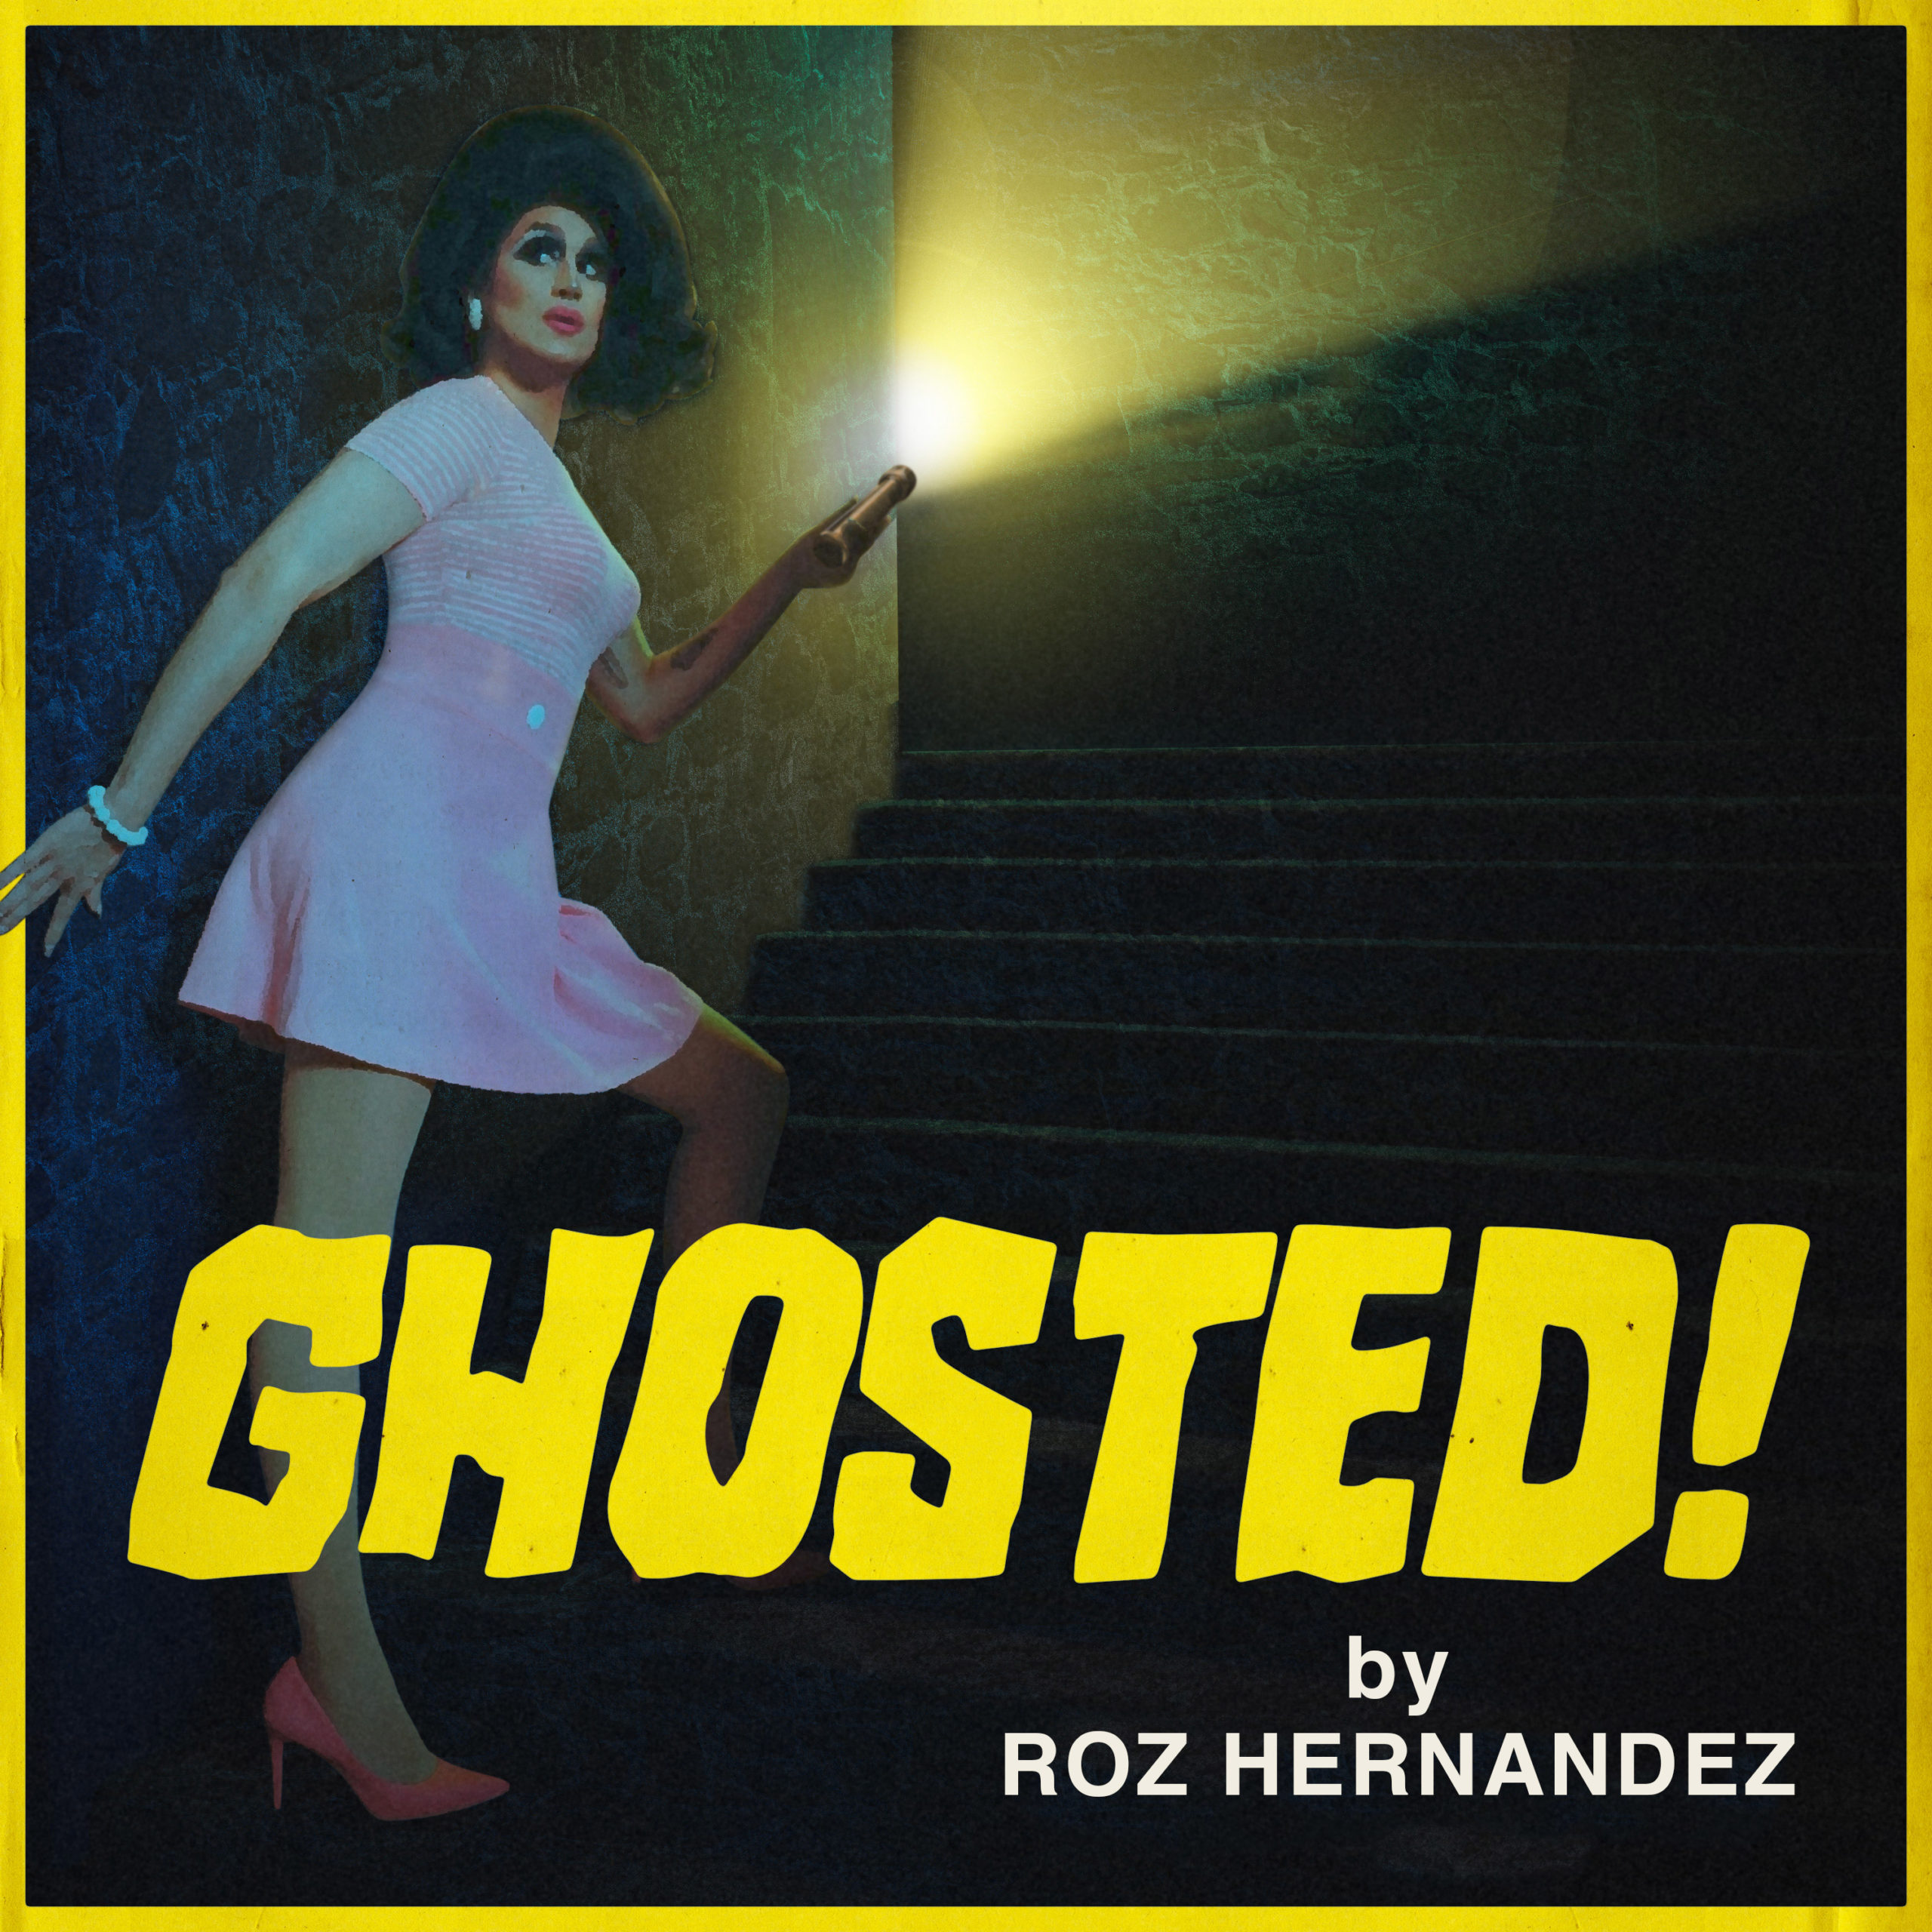 Ghosted! by Roz Hernandez